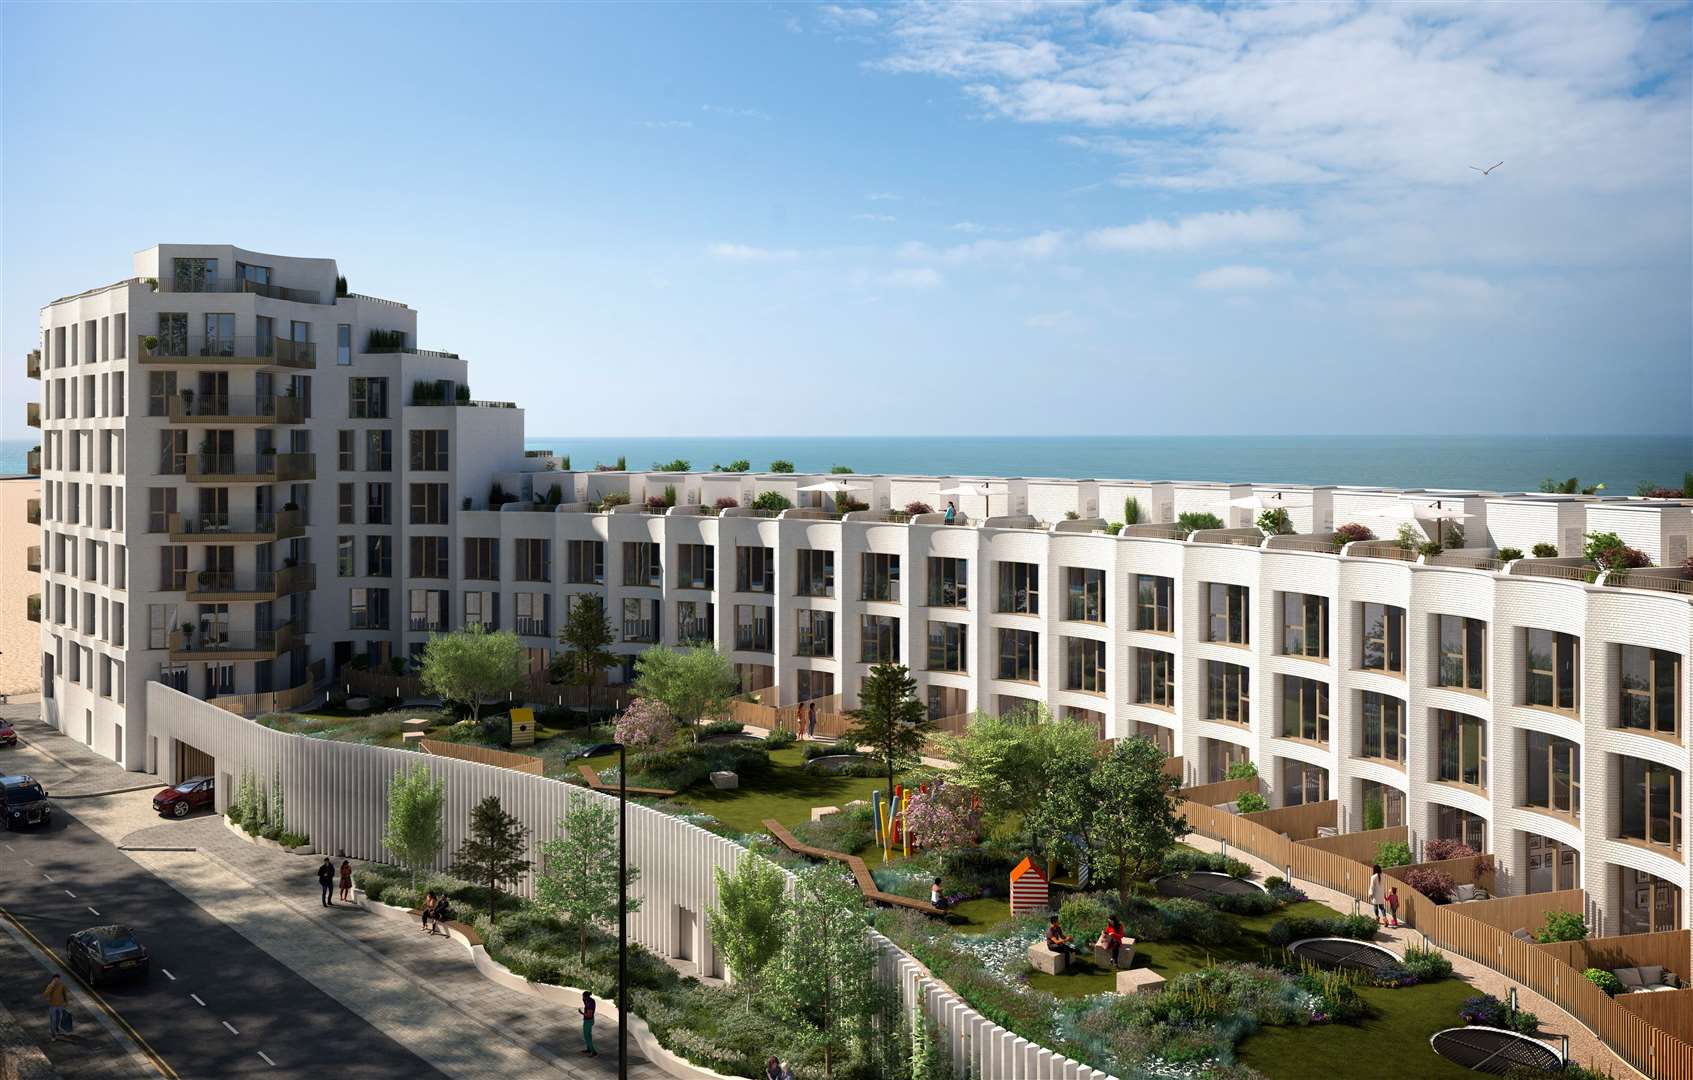 There are 20 townhouses available to buy on Folkestone seafront. Picture: Folkestone Harbour Seafront Development Company